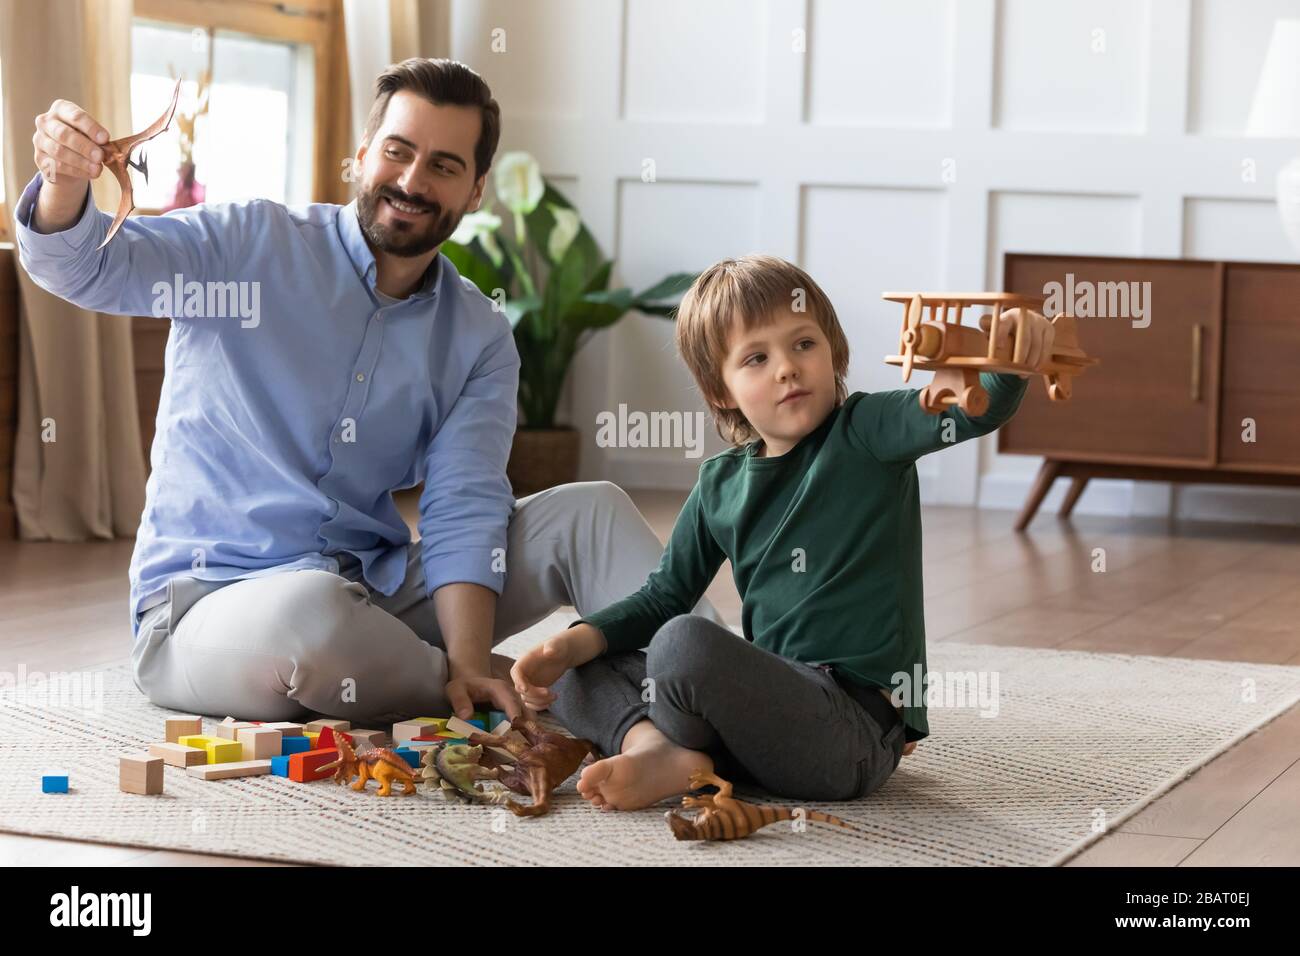 Little boy playing with wooden airplane, enjoying playtime with daddy. Stock Photo